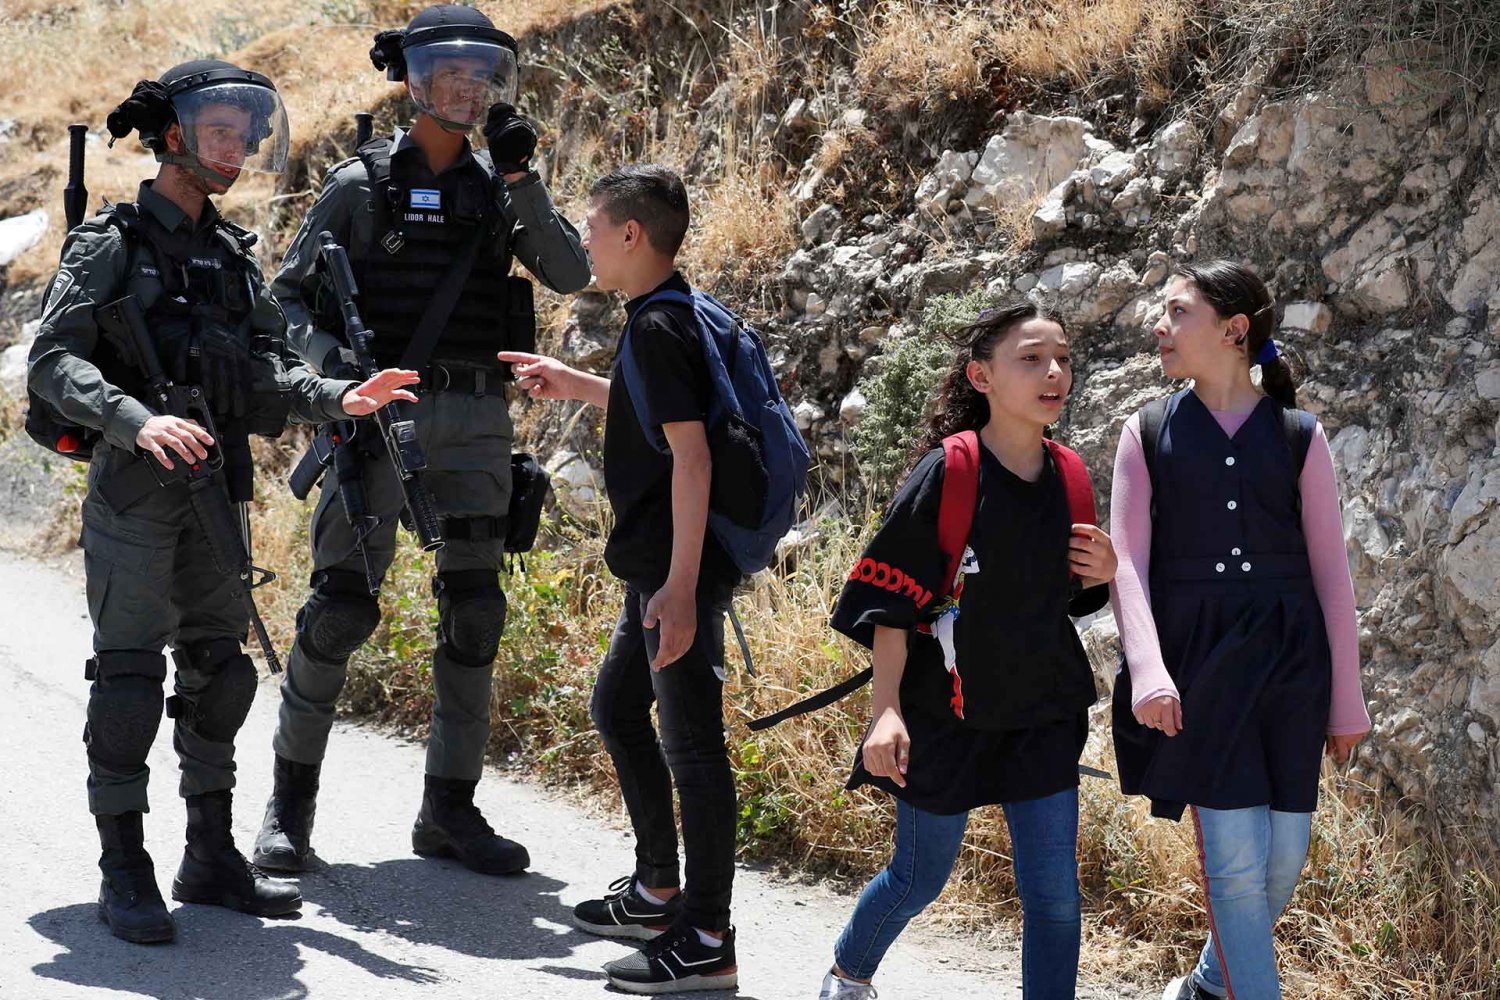 A Palestinian youth en route to school is stopped by Israeli border police near the site where Israeli bulldozers are demolishing a Palestinian house in the Palestinian east neighborhood of Silwan, May 10, 2022.